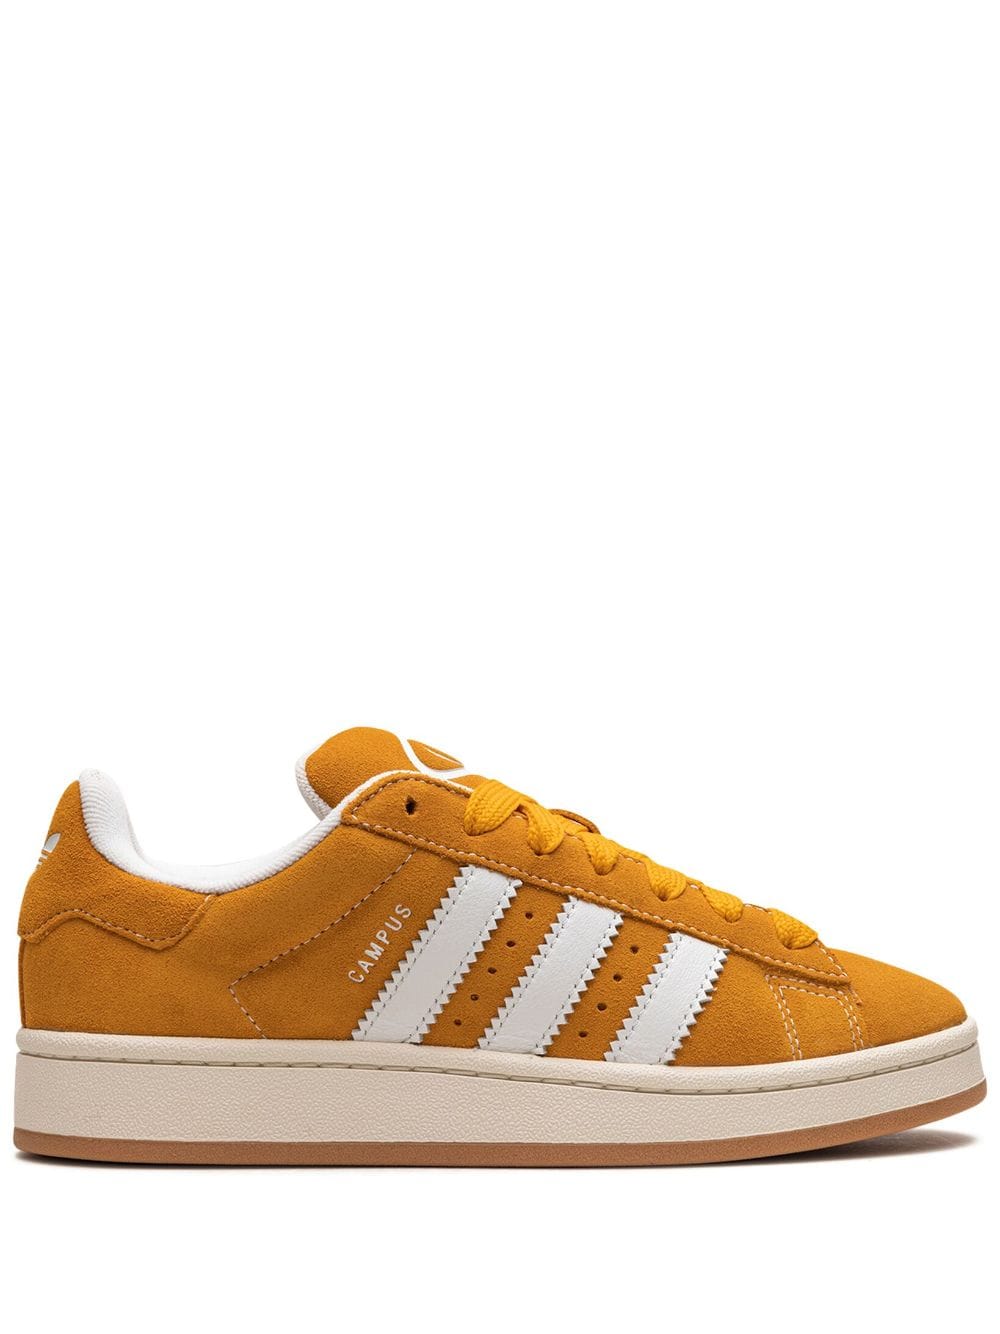 adidas Campus 80s low-top sneakers - Brown